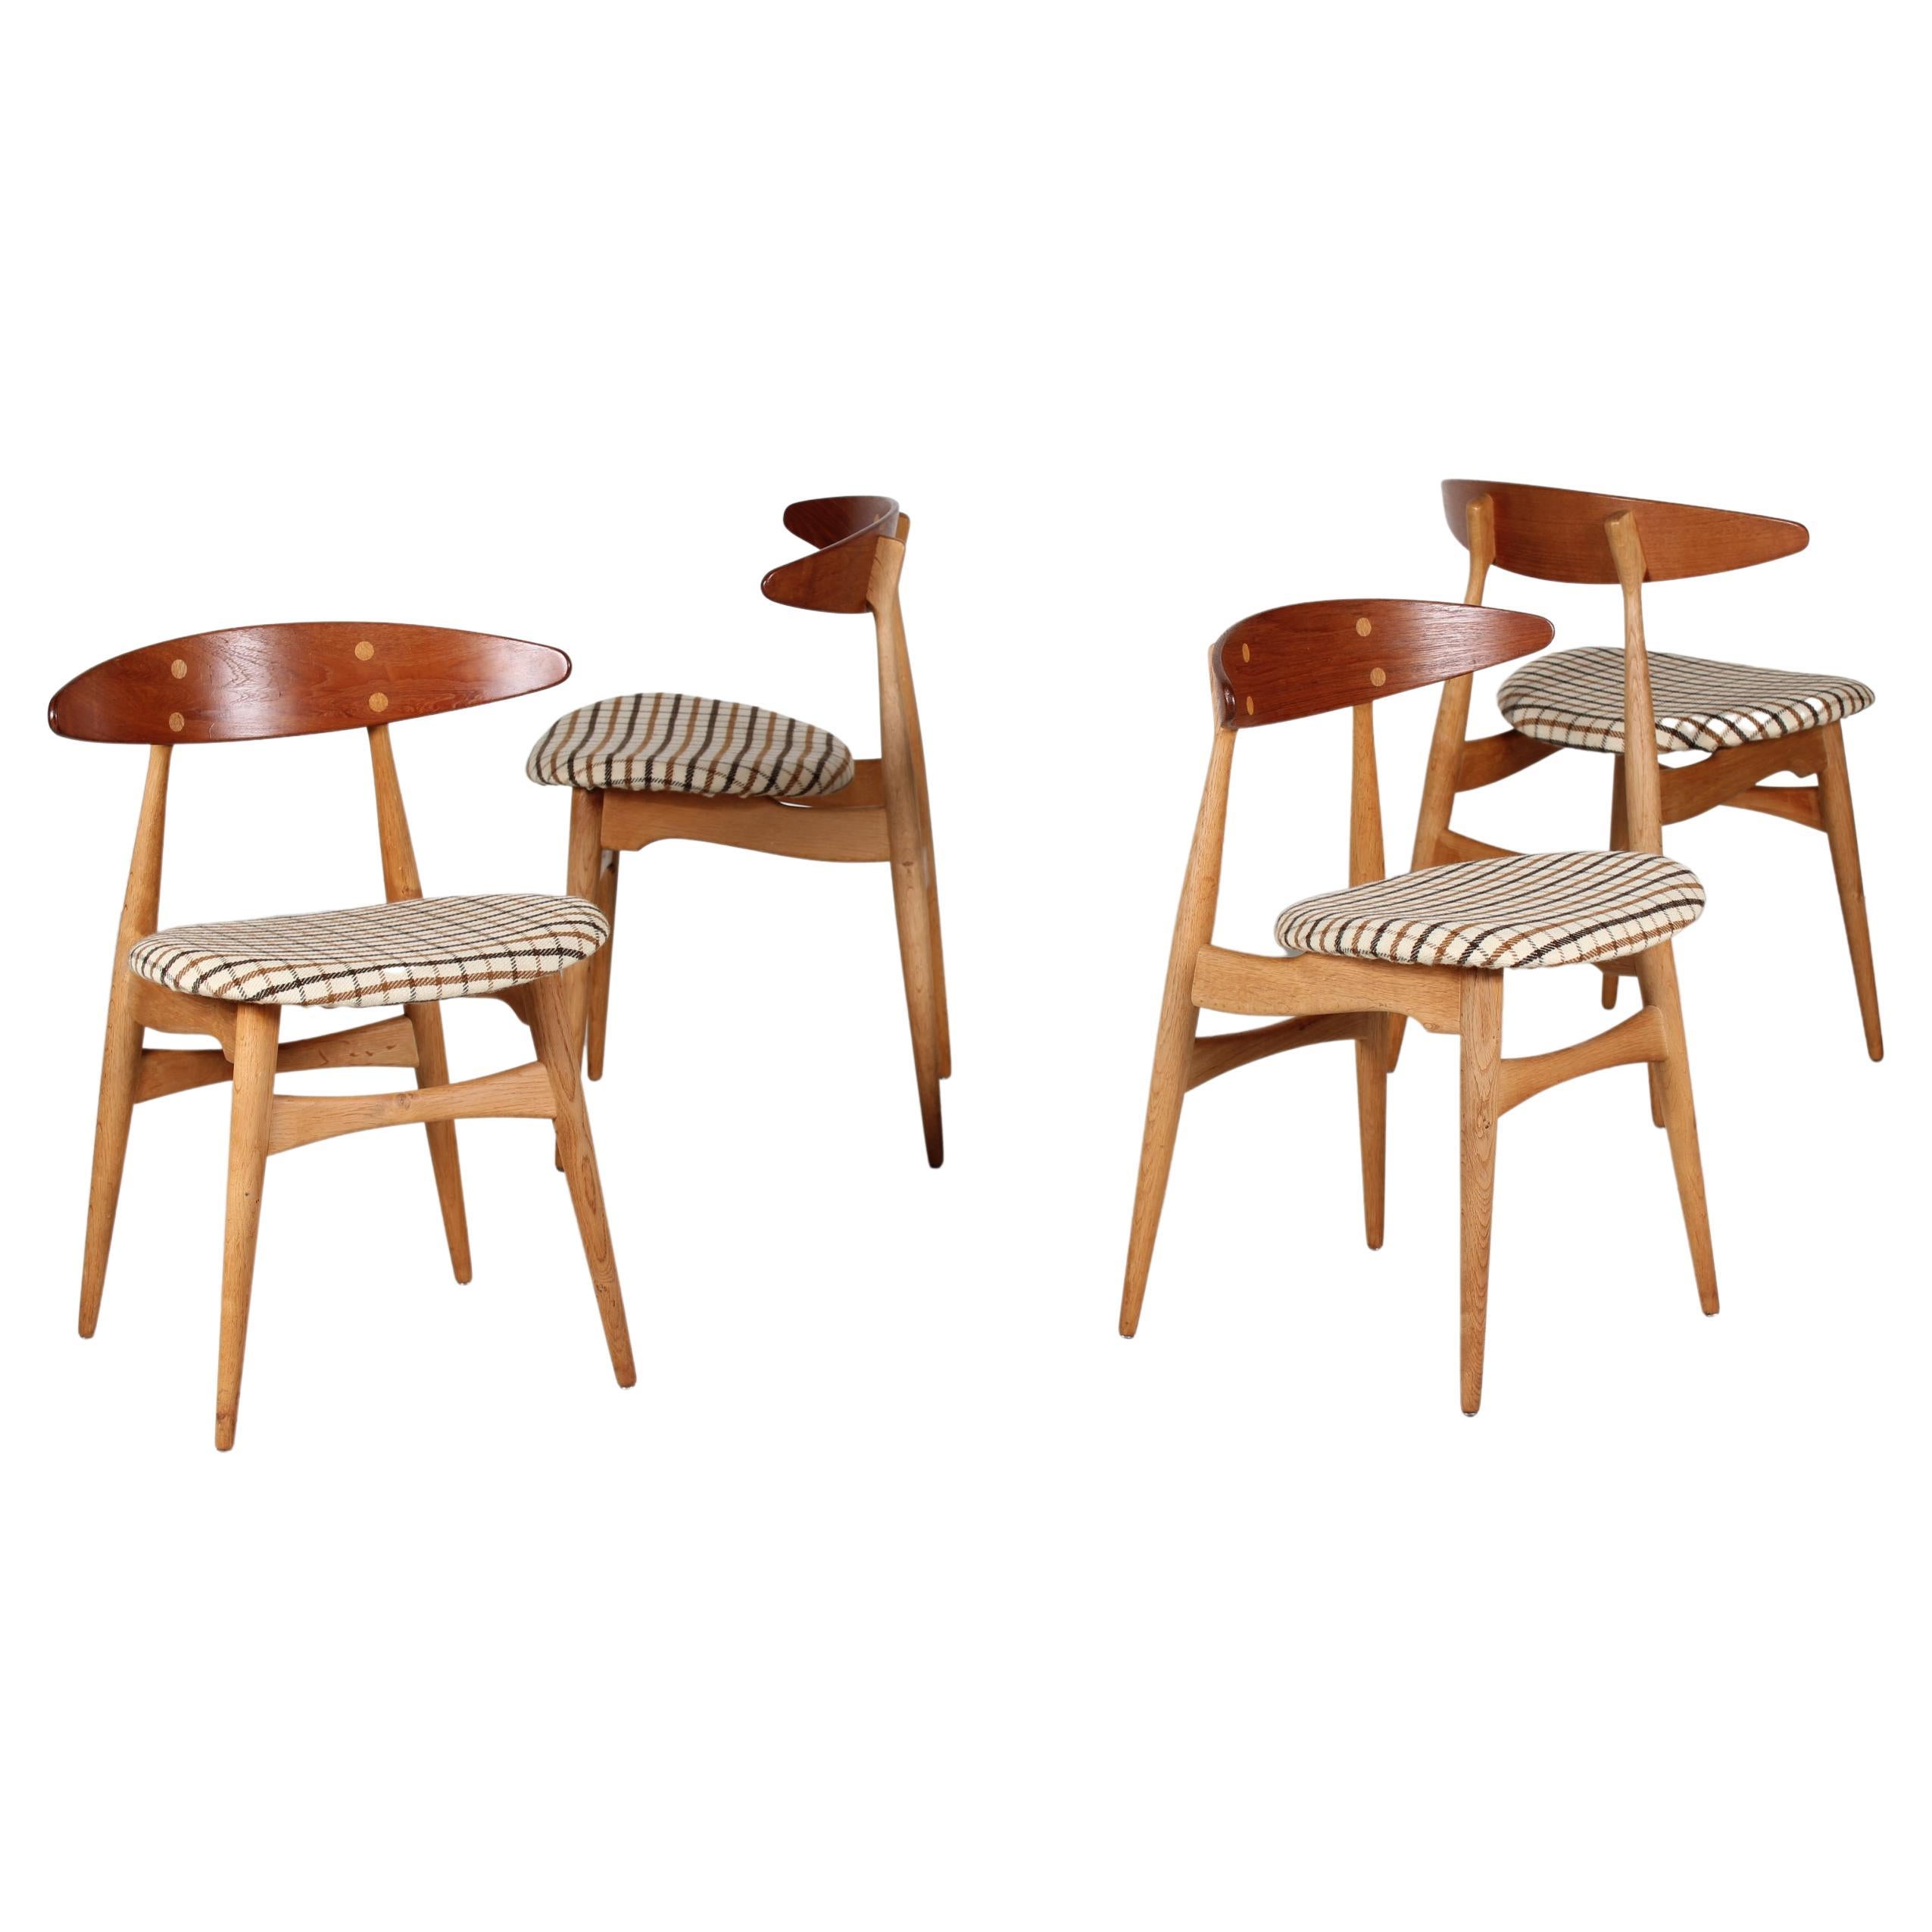 Hans J. Wegner Set of Four Chairs of Oak and Teak Model CH33, Carl Hansen and For Sale at 1stDibs